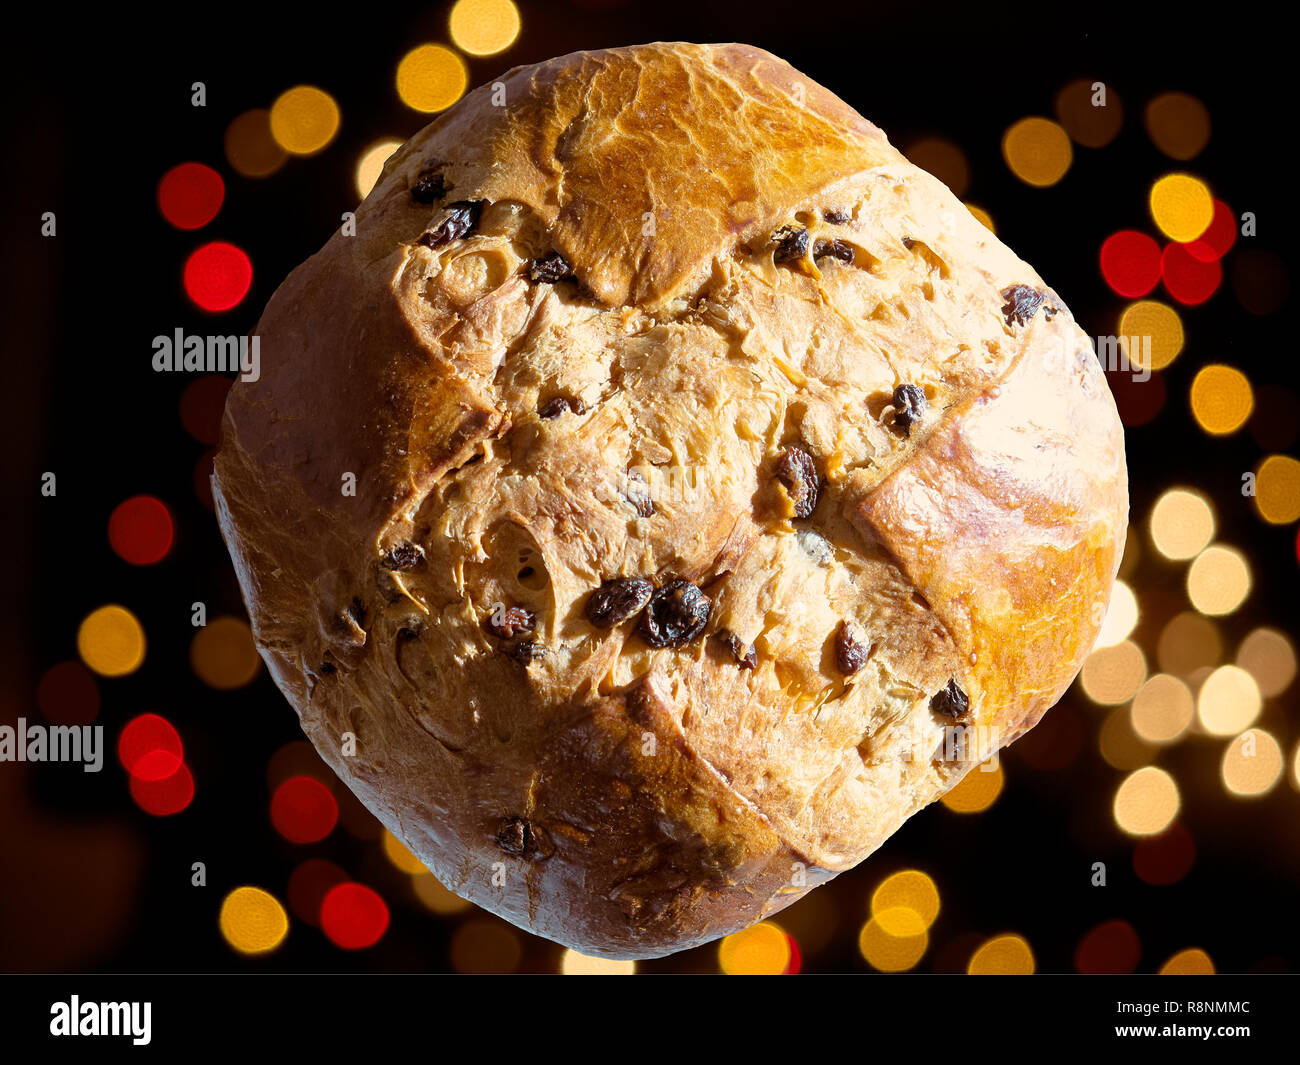 Panettone seen from above, floating on a background lit by Christmas red and yellow lights Stock Photo